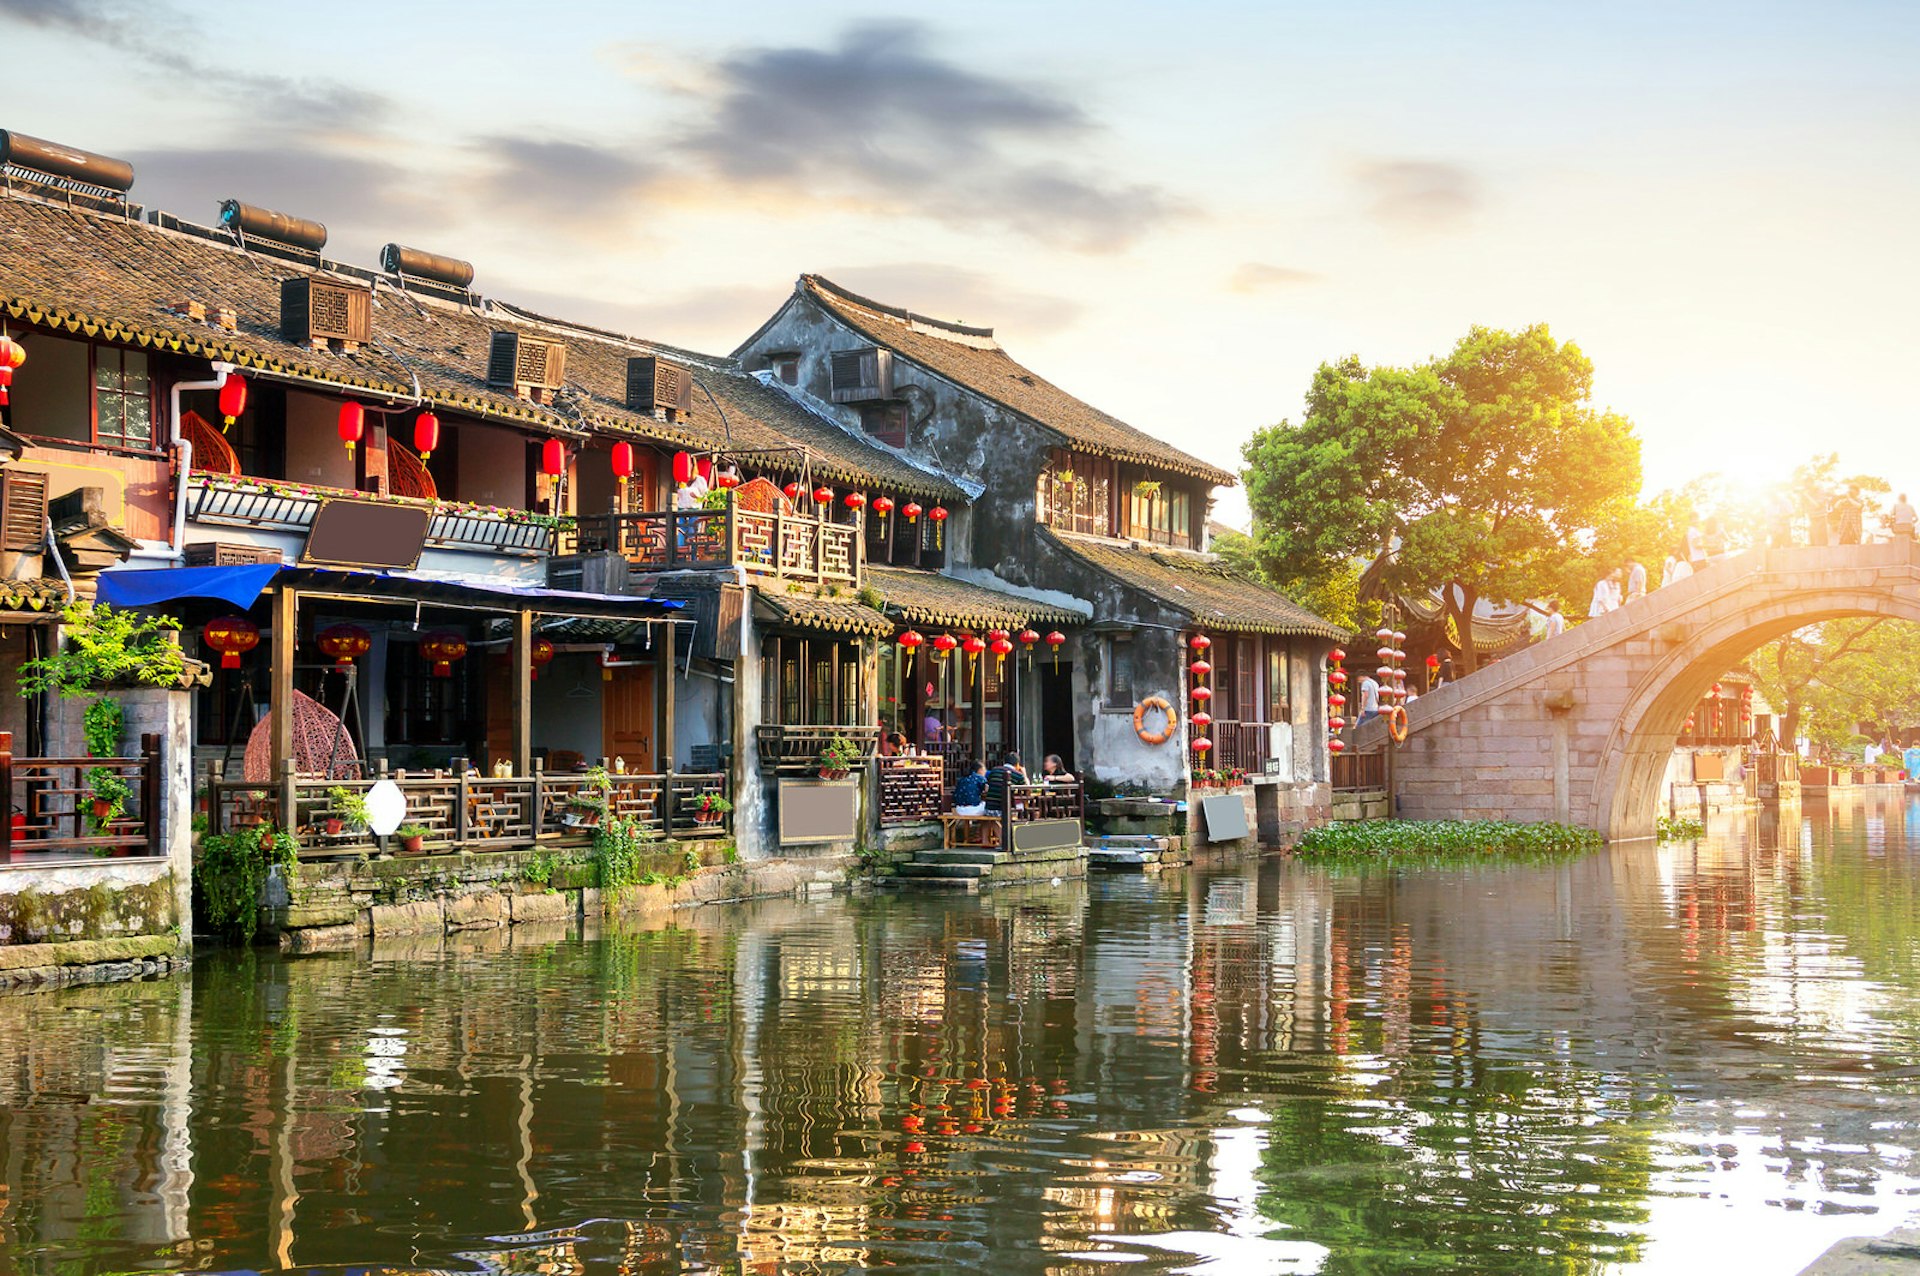 Ancient houses line the waterways in Xitang